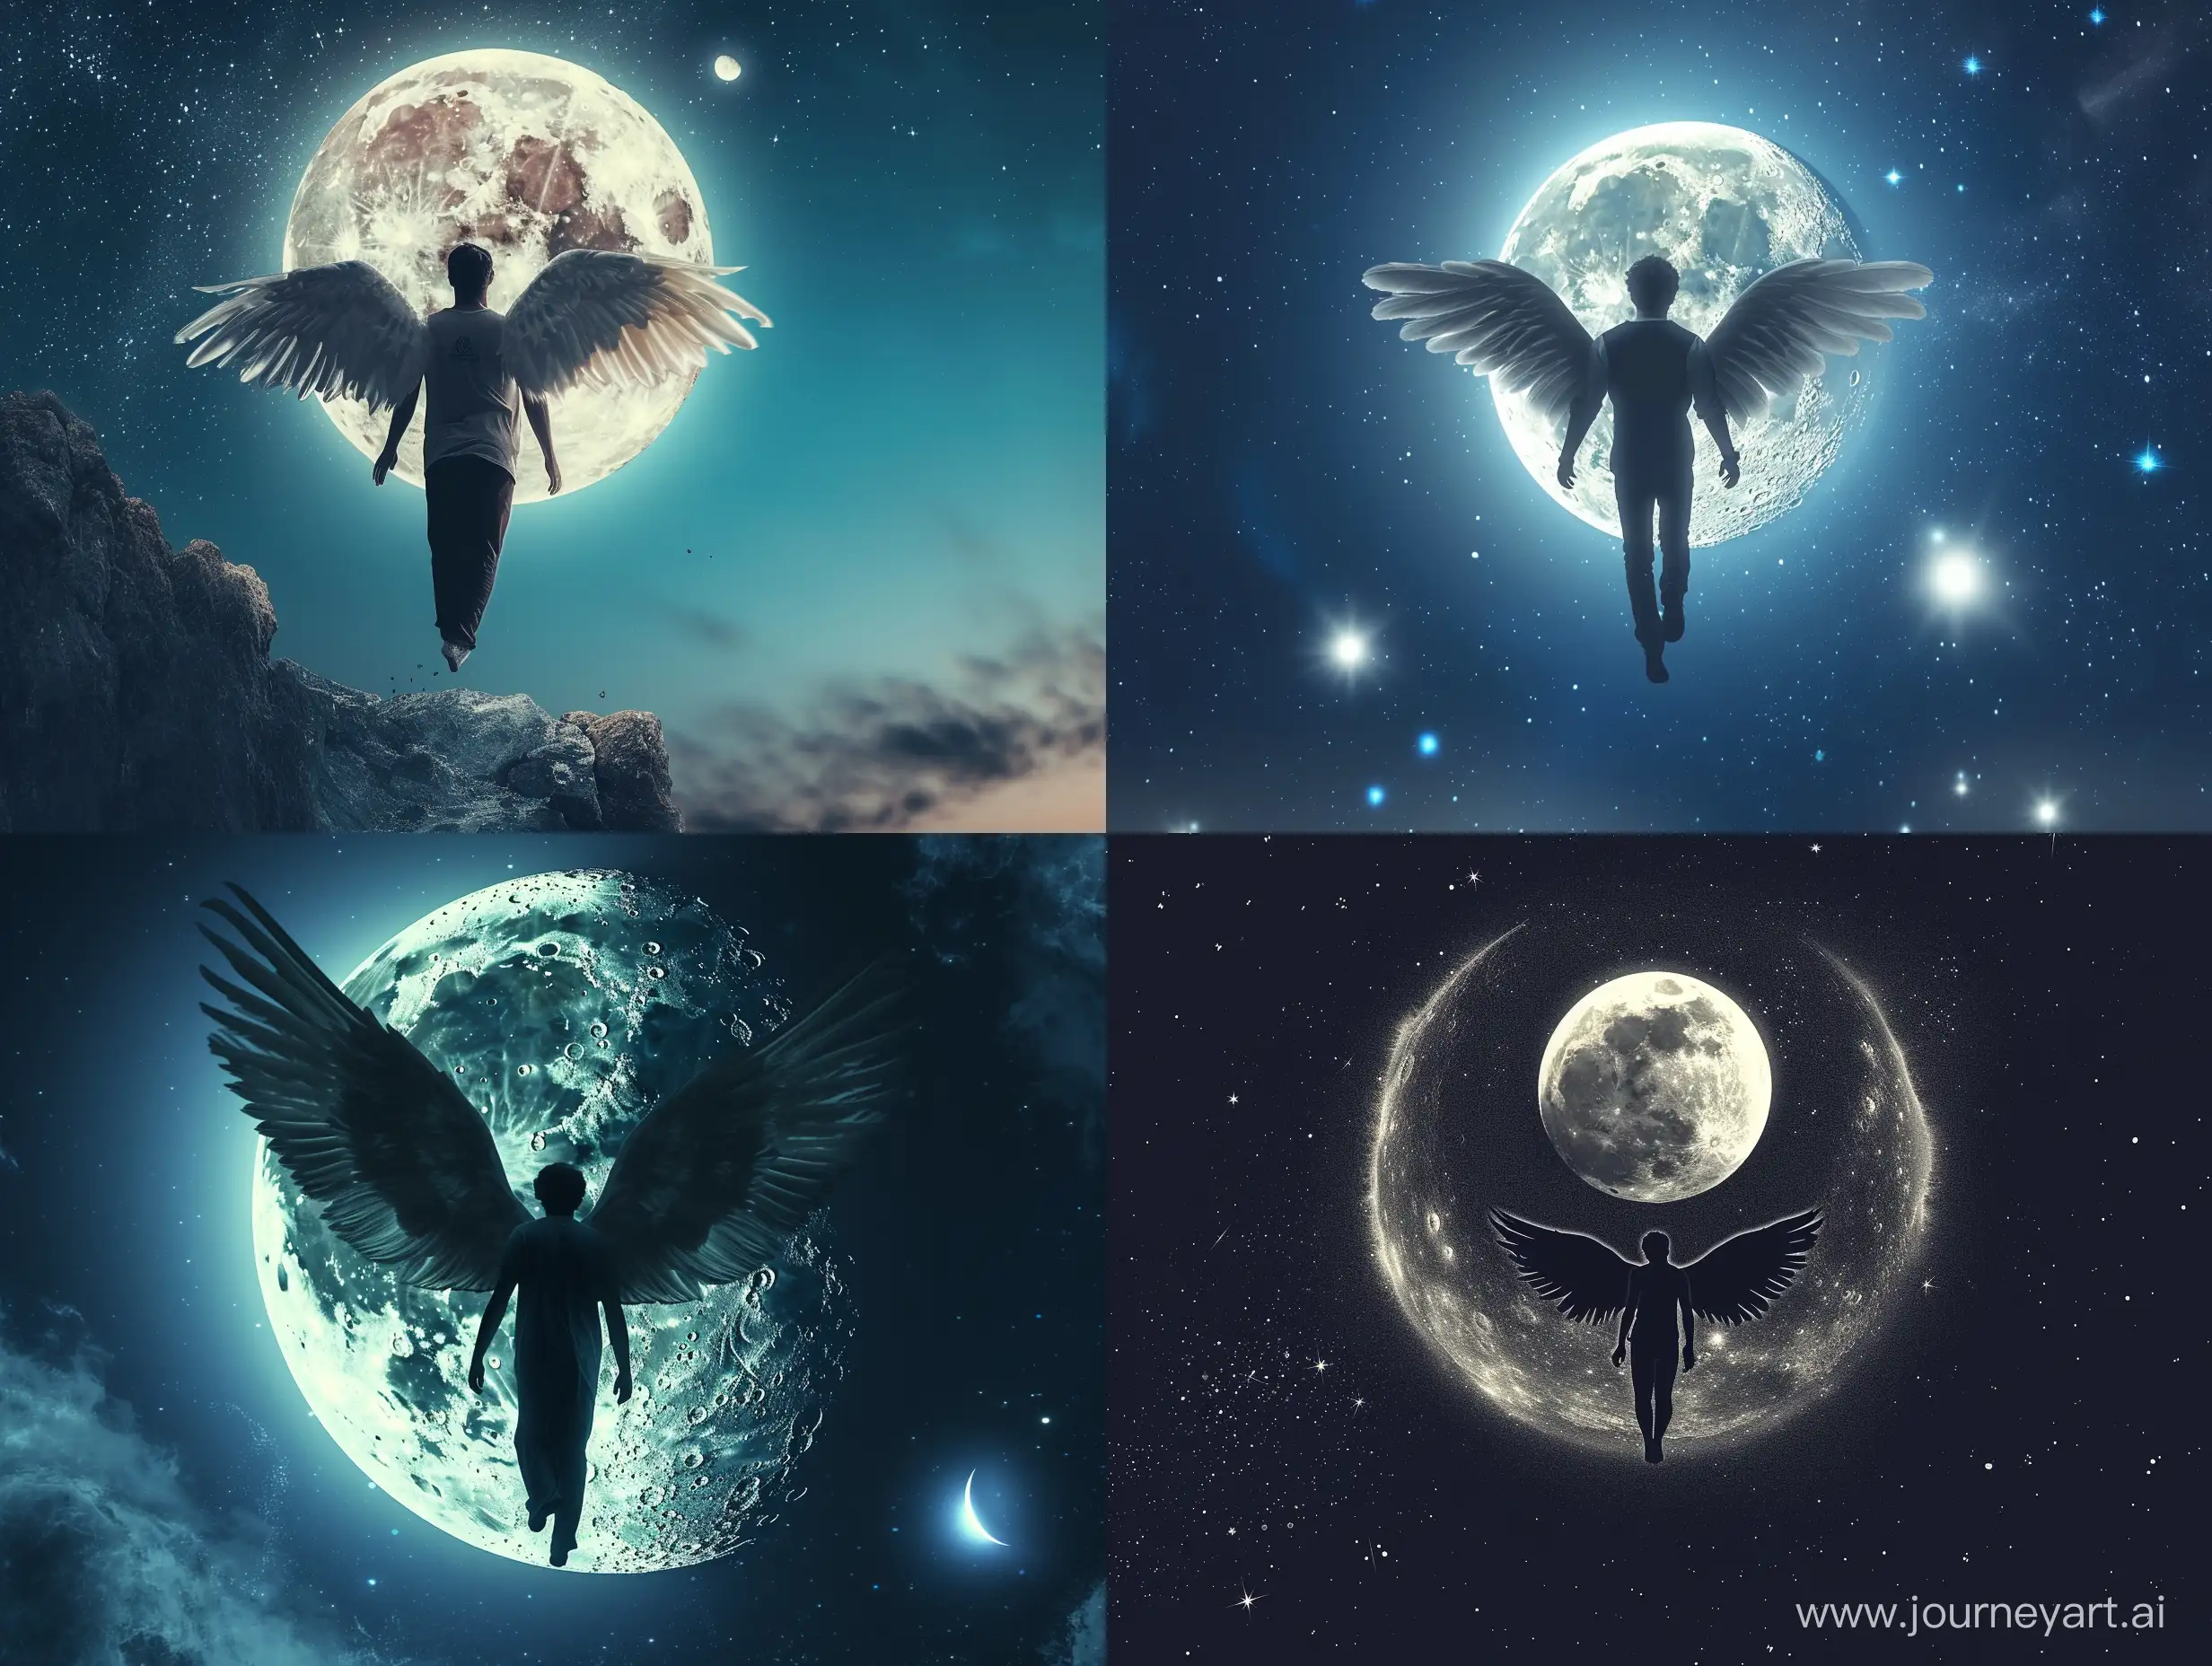 Enchanted-Flight-of-a-Man-with-Angel-Wings-Towards-the-Moon